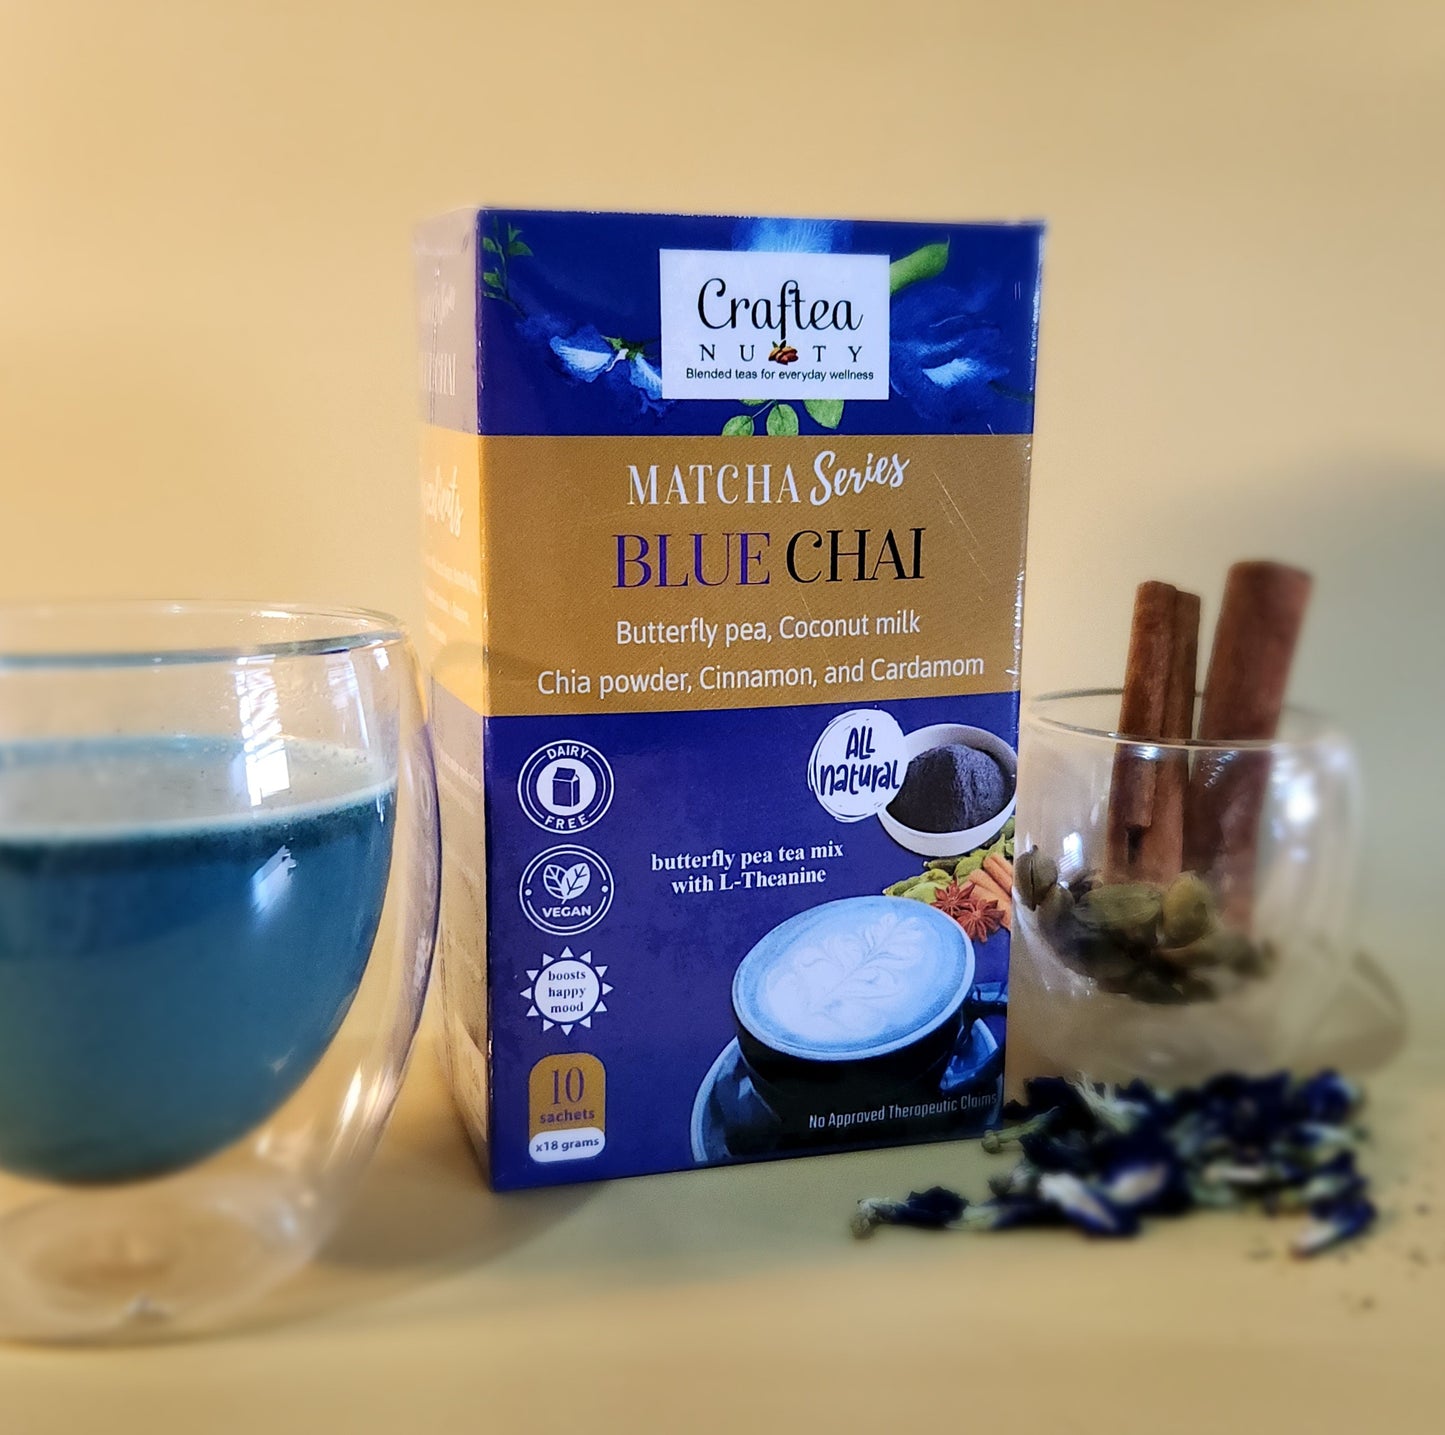 Premium Matcha Blend | Blue Chai with Butterfly pea powder, cinnamon and L-theanine | matcha powder